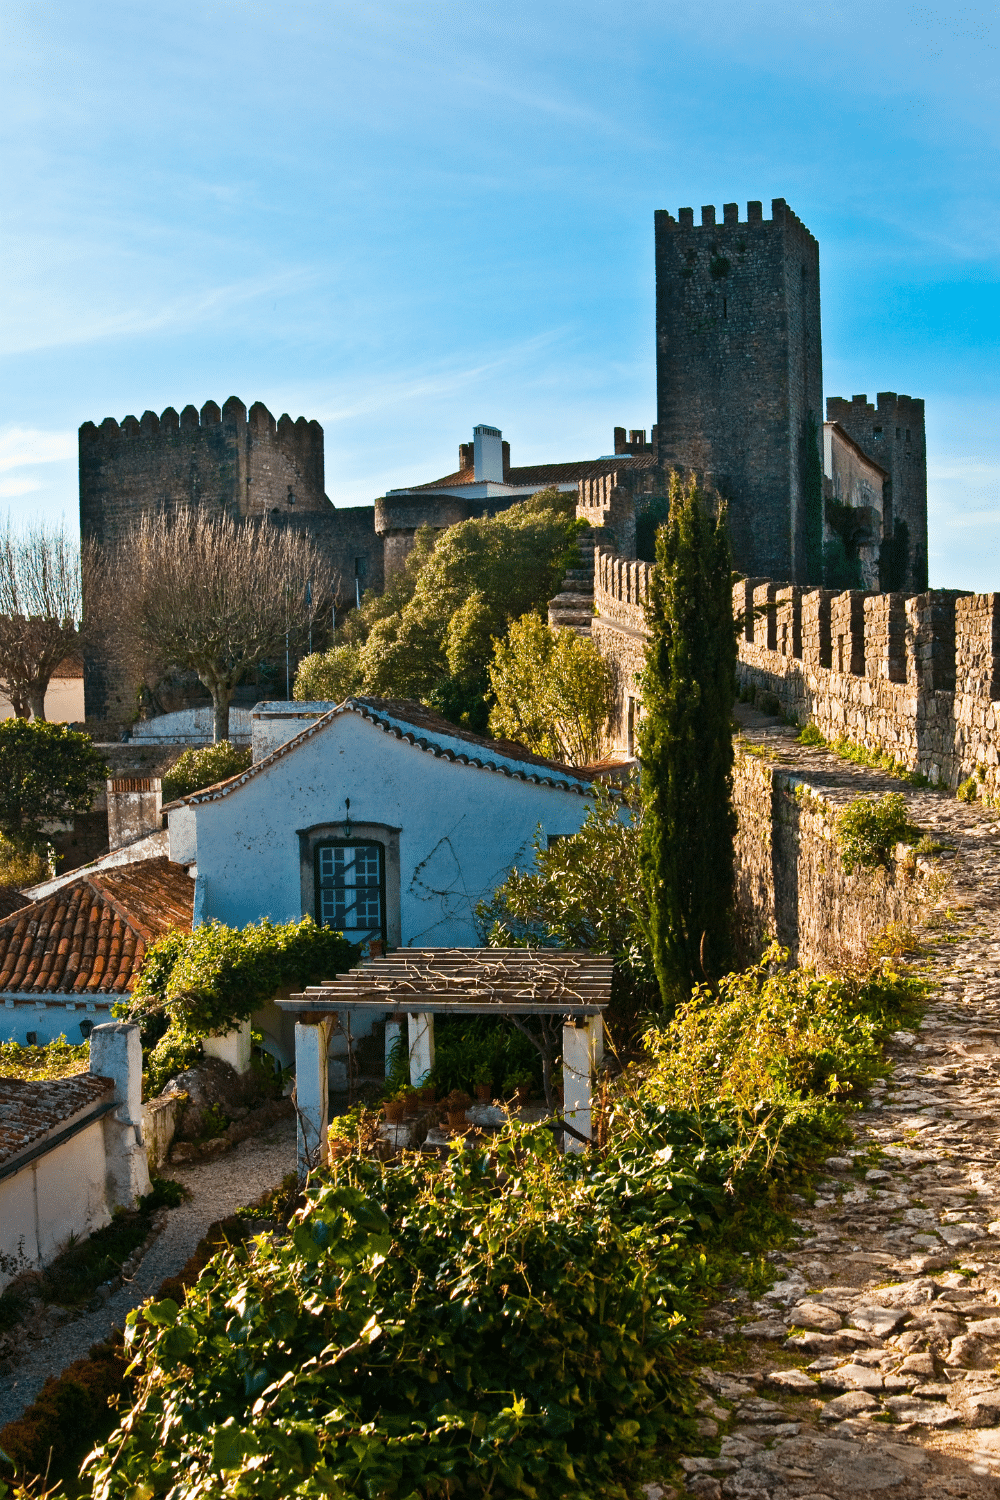 visit obidos portugal - picture shows the obidos castle walls and some of the town of obidos in portugal.